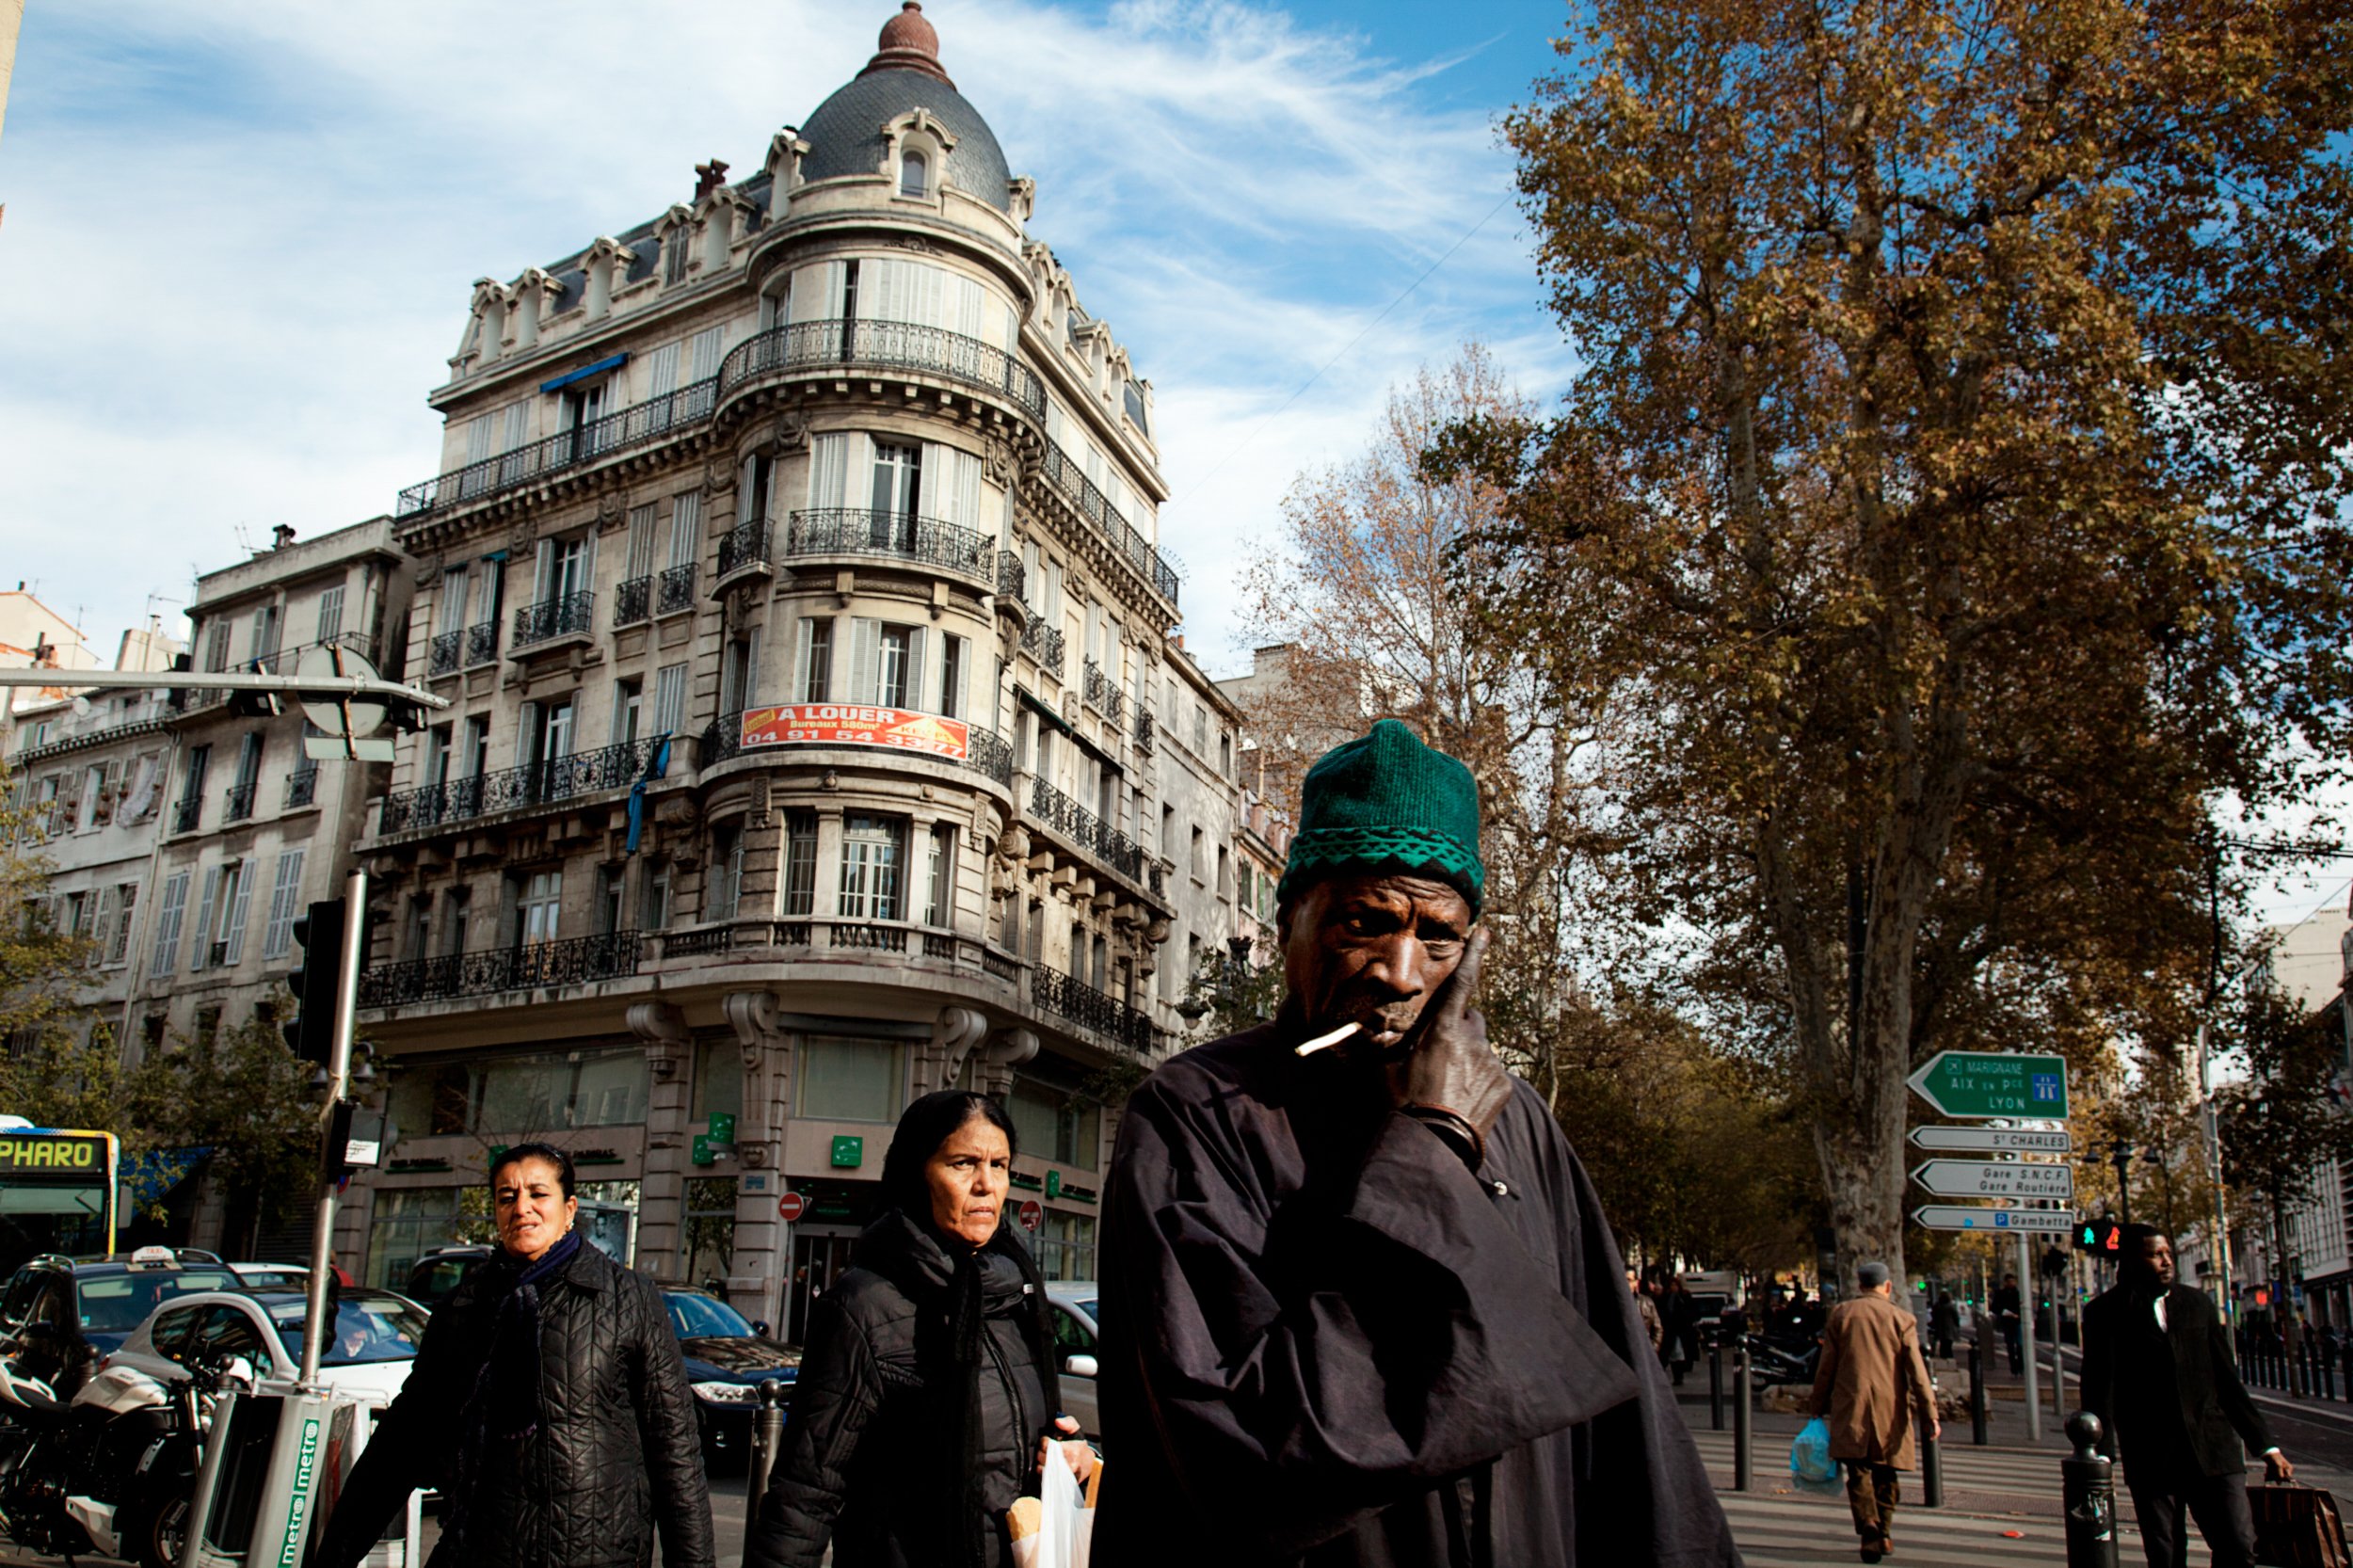  Pedestrians on Le Canebiere reflect the rich diversity of people who live in Marseille, France, on Nov. 25, 2010. 